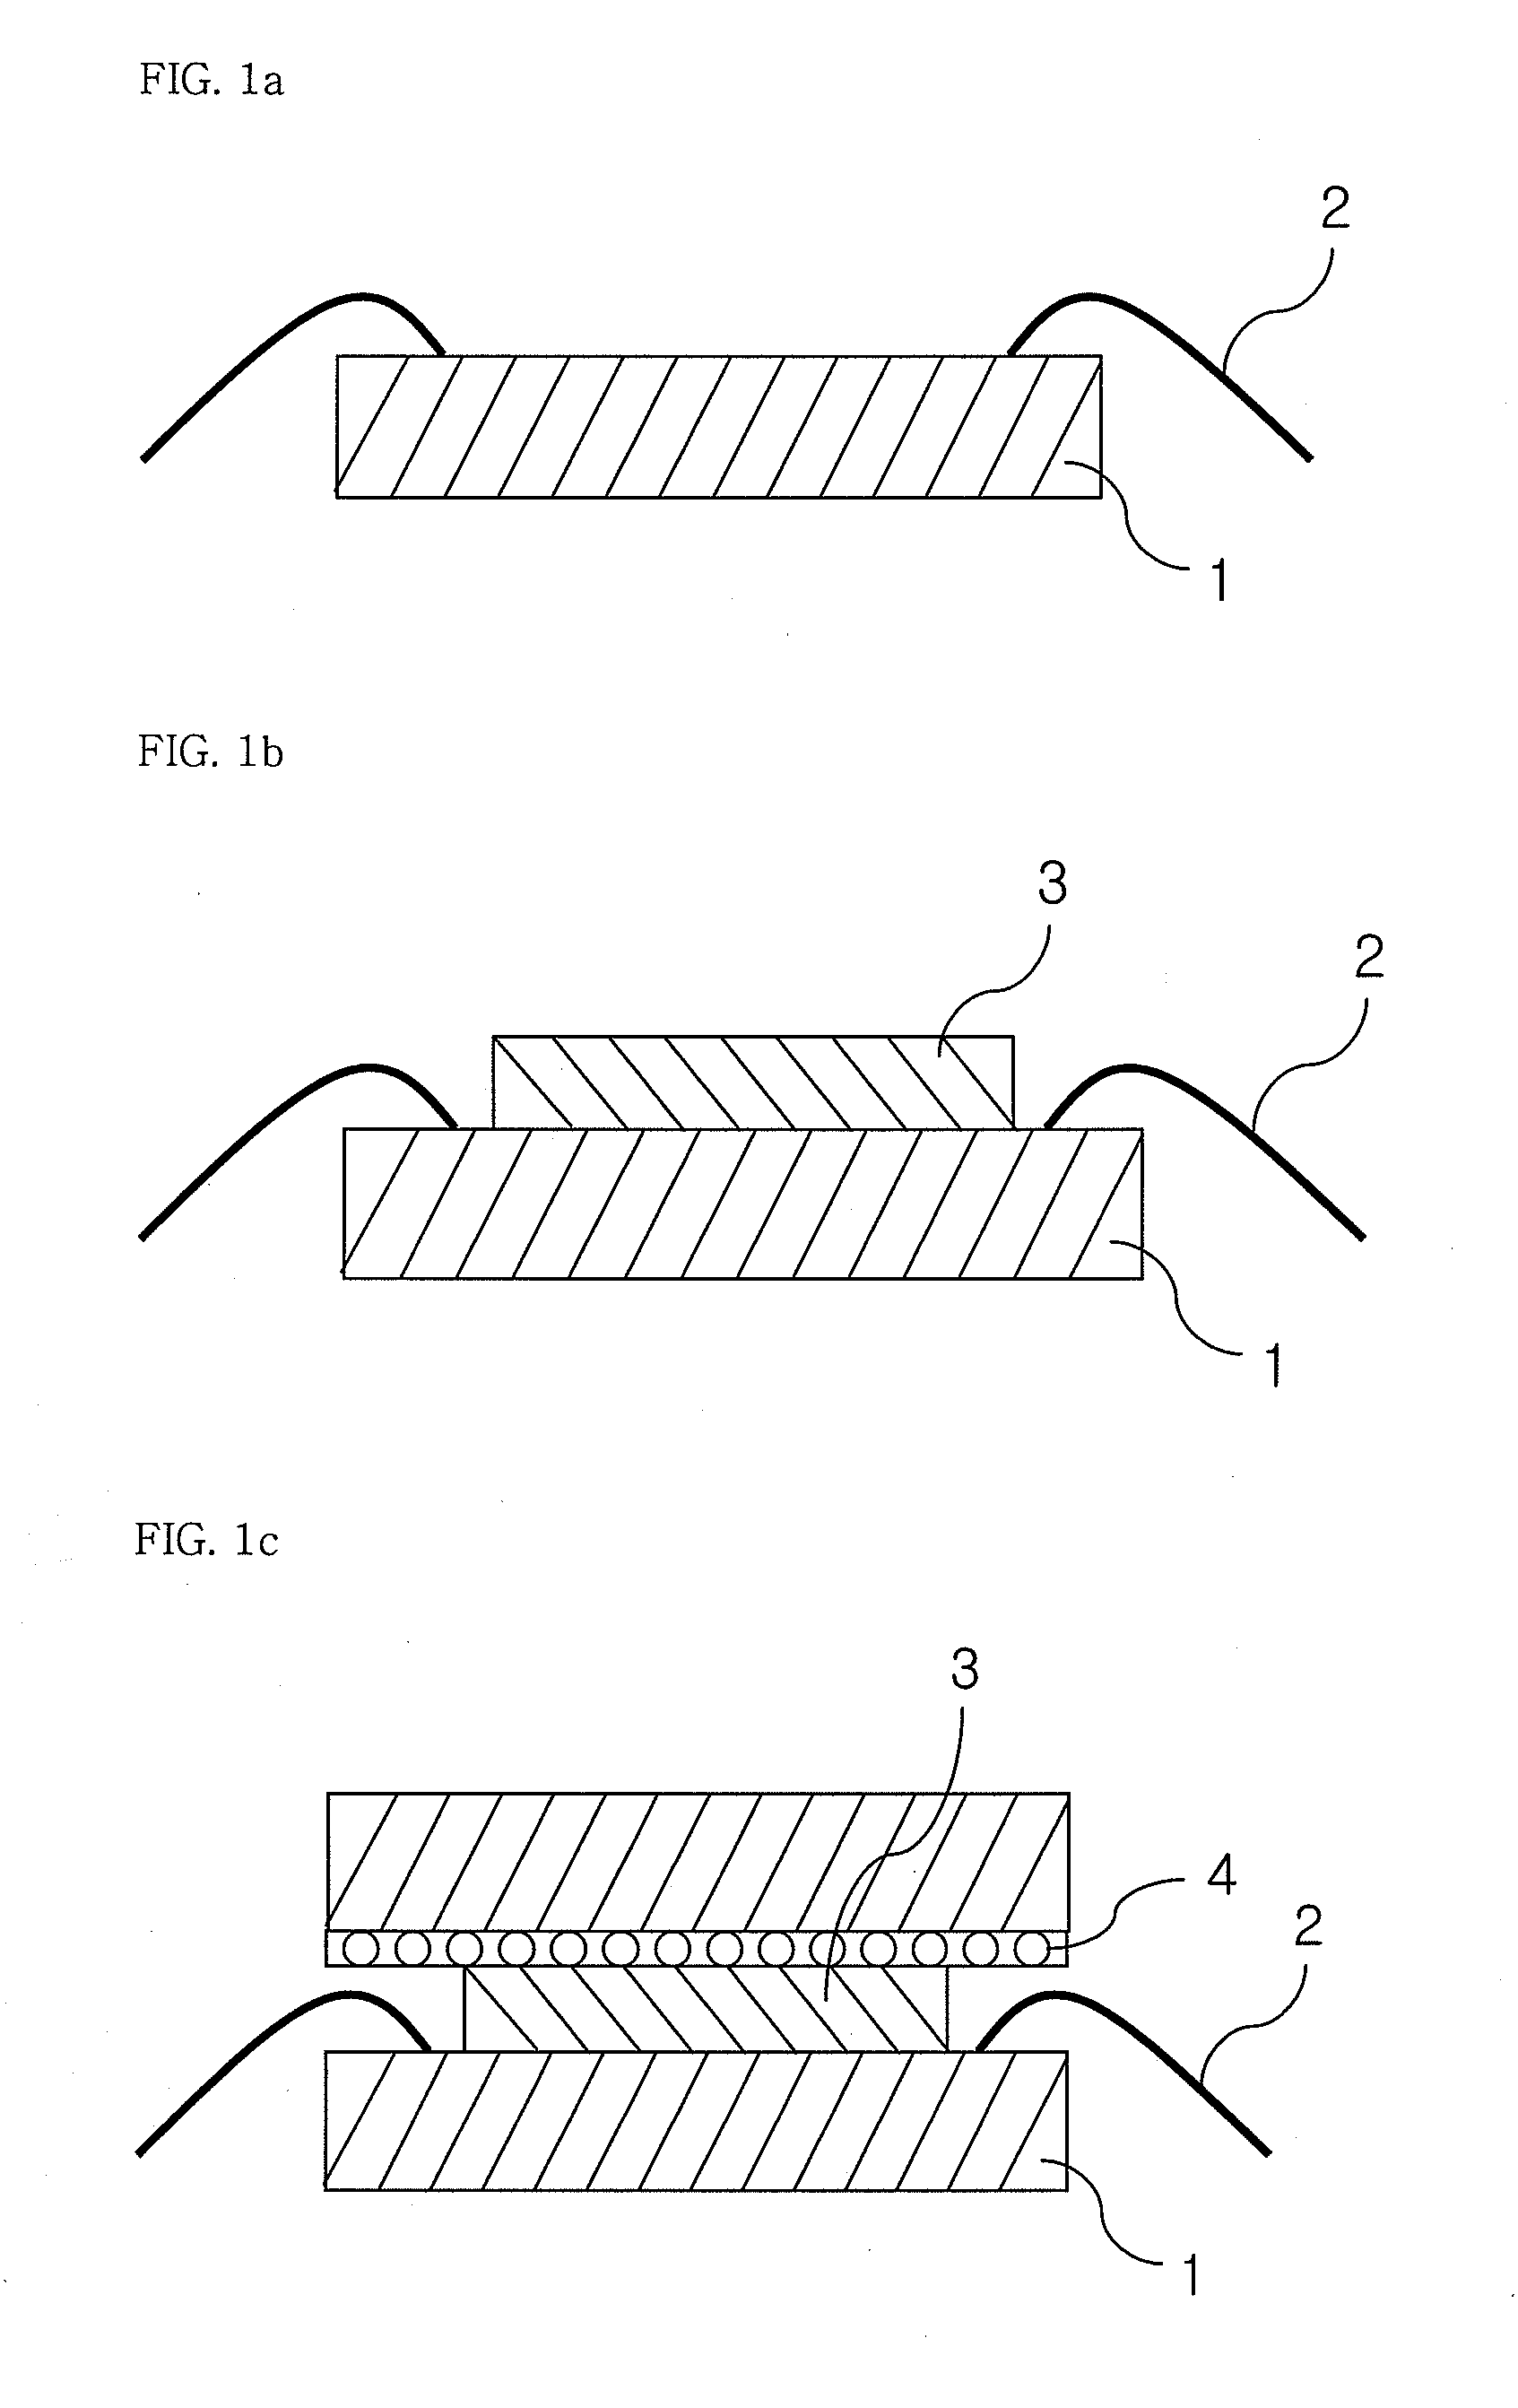 Adhesive film for stacking semiconductor chips